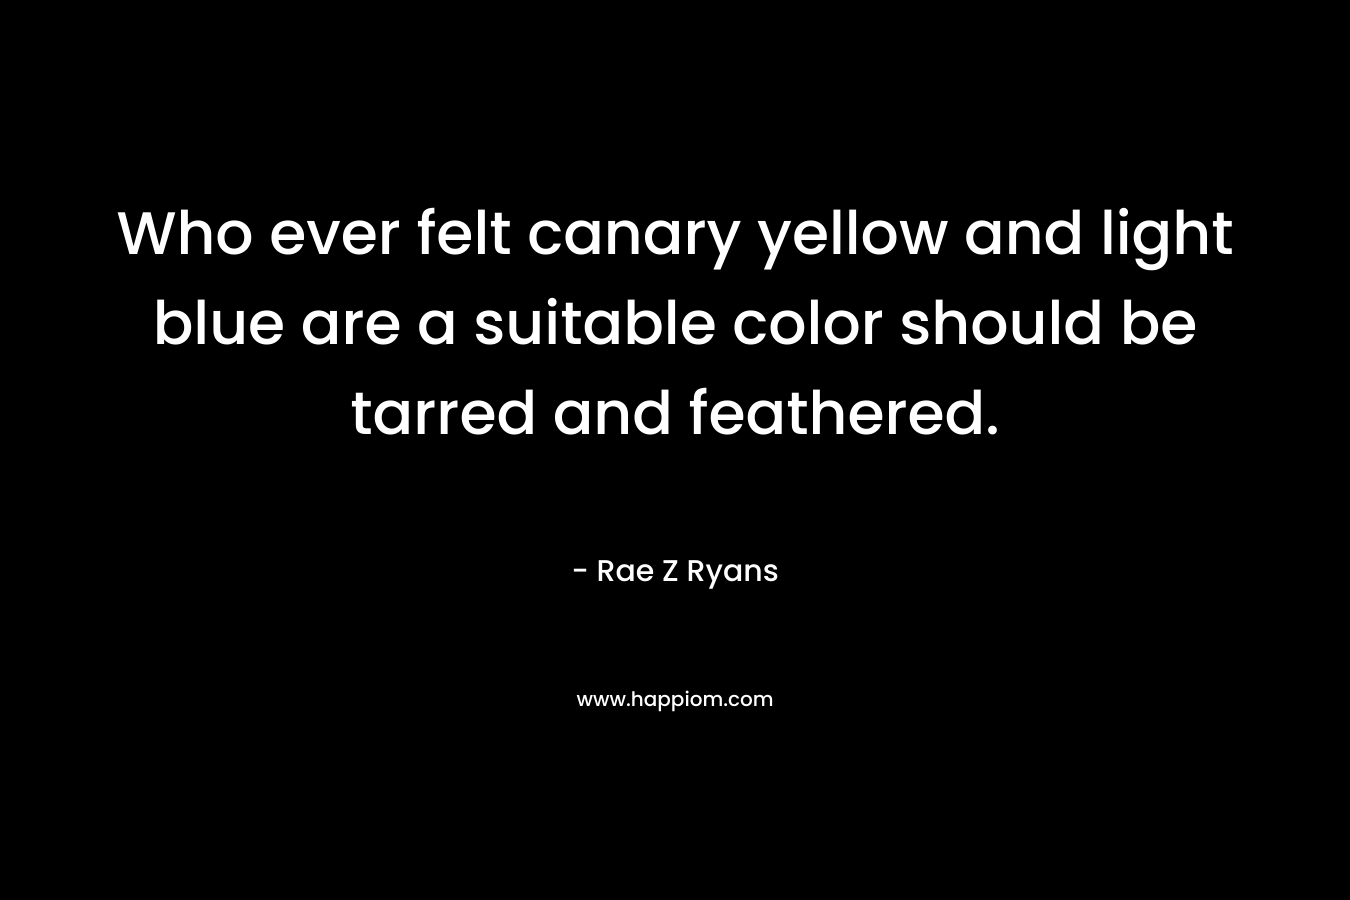 Who ever felt canary yellow and light blue are a suitable color should be tarred and feathered. – Rae Z Ryans